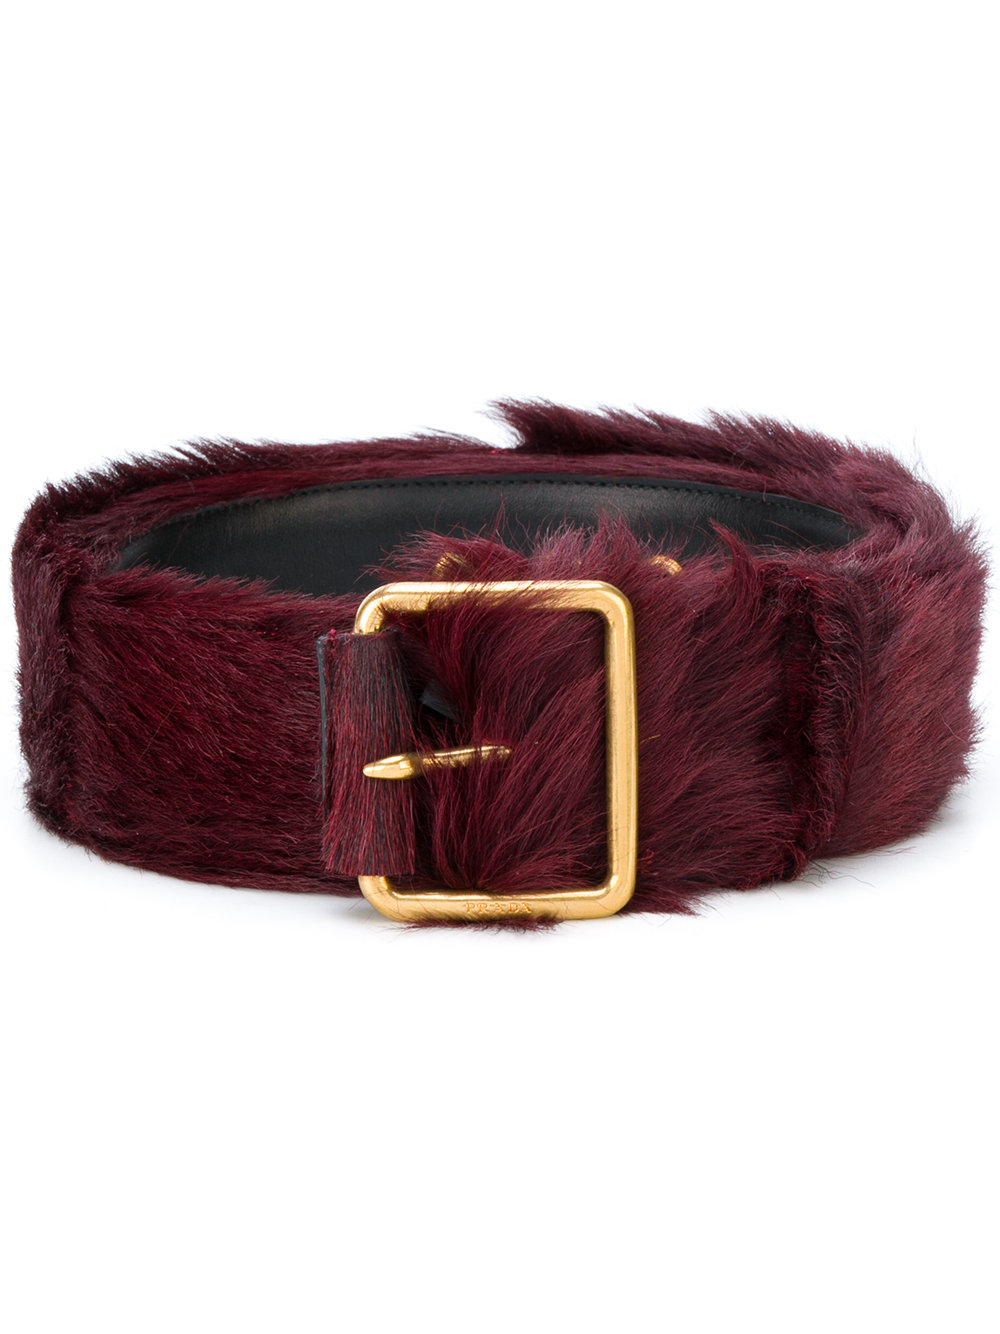 BELTS | THE UNTITLED BOUTIQUE